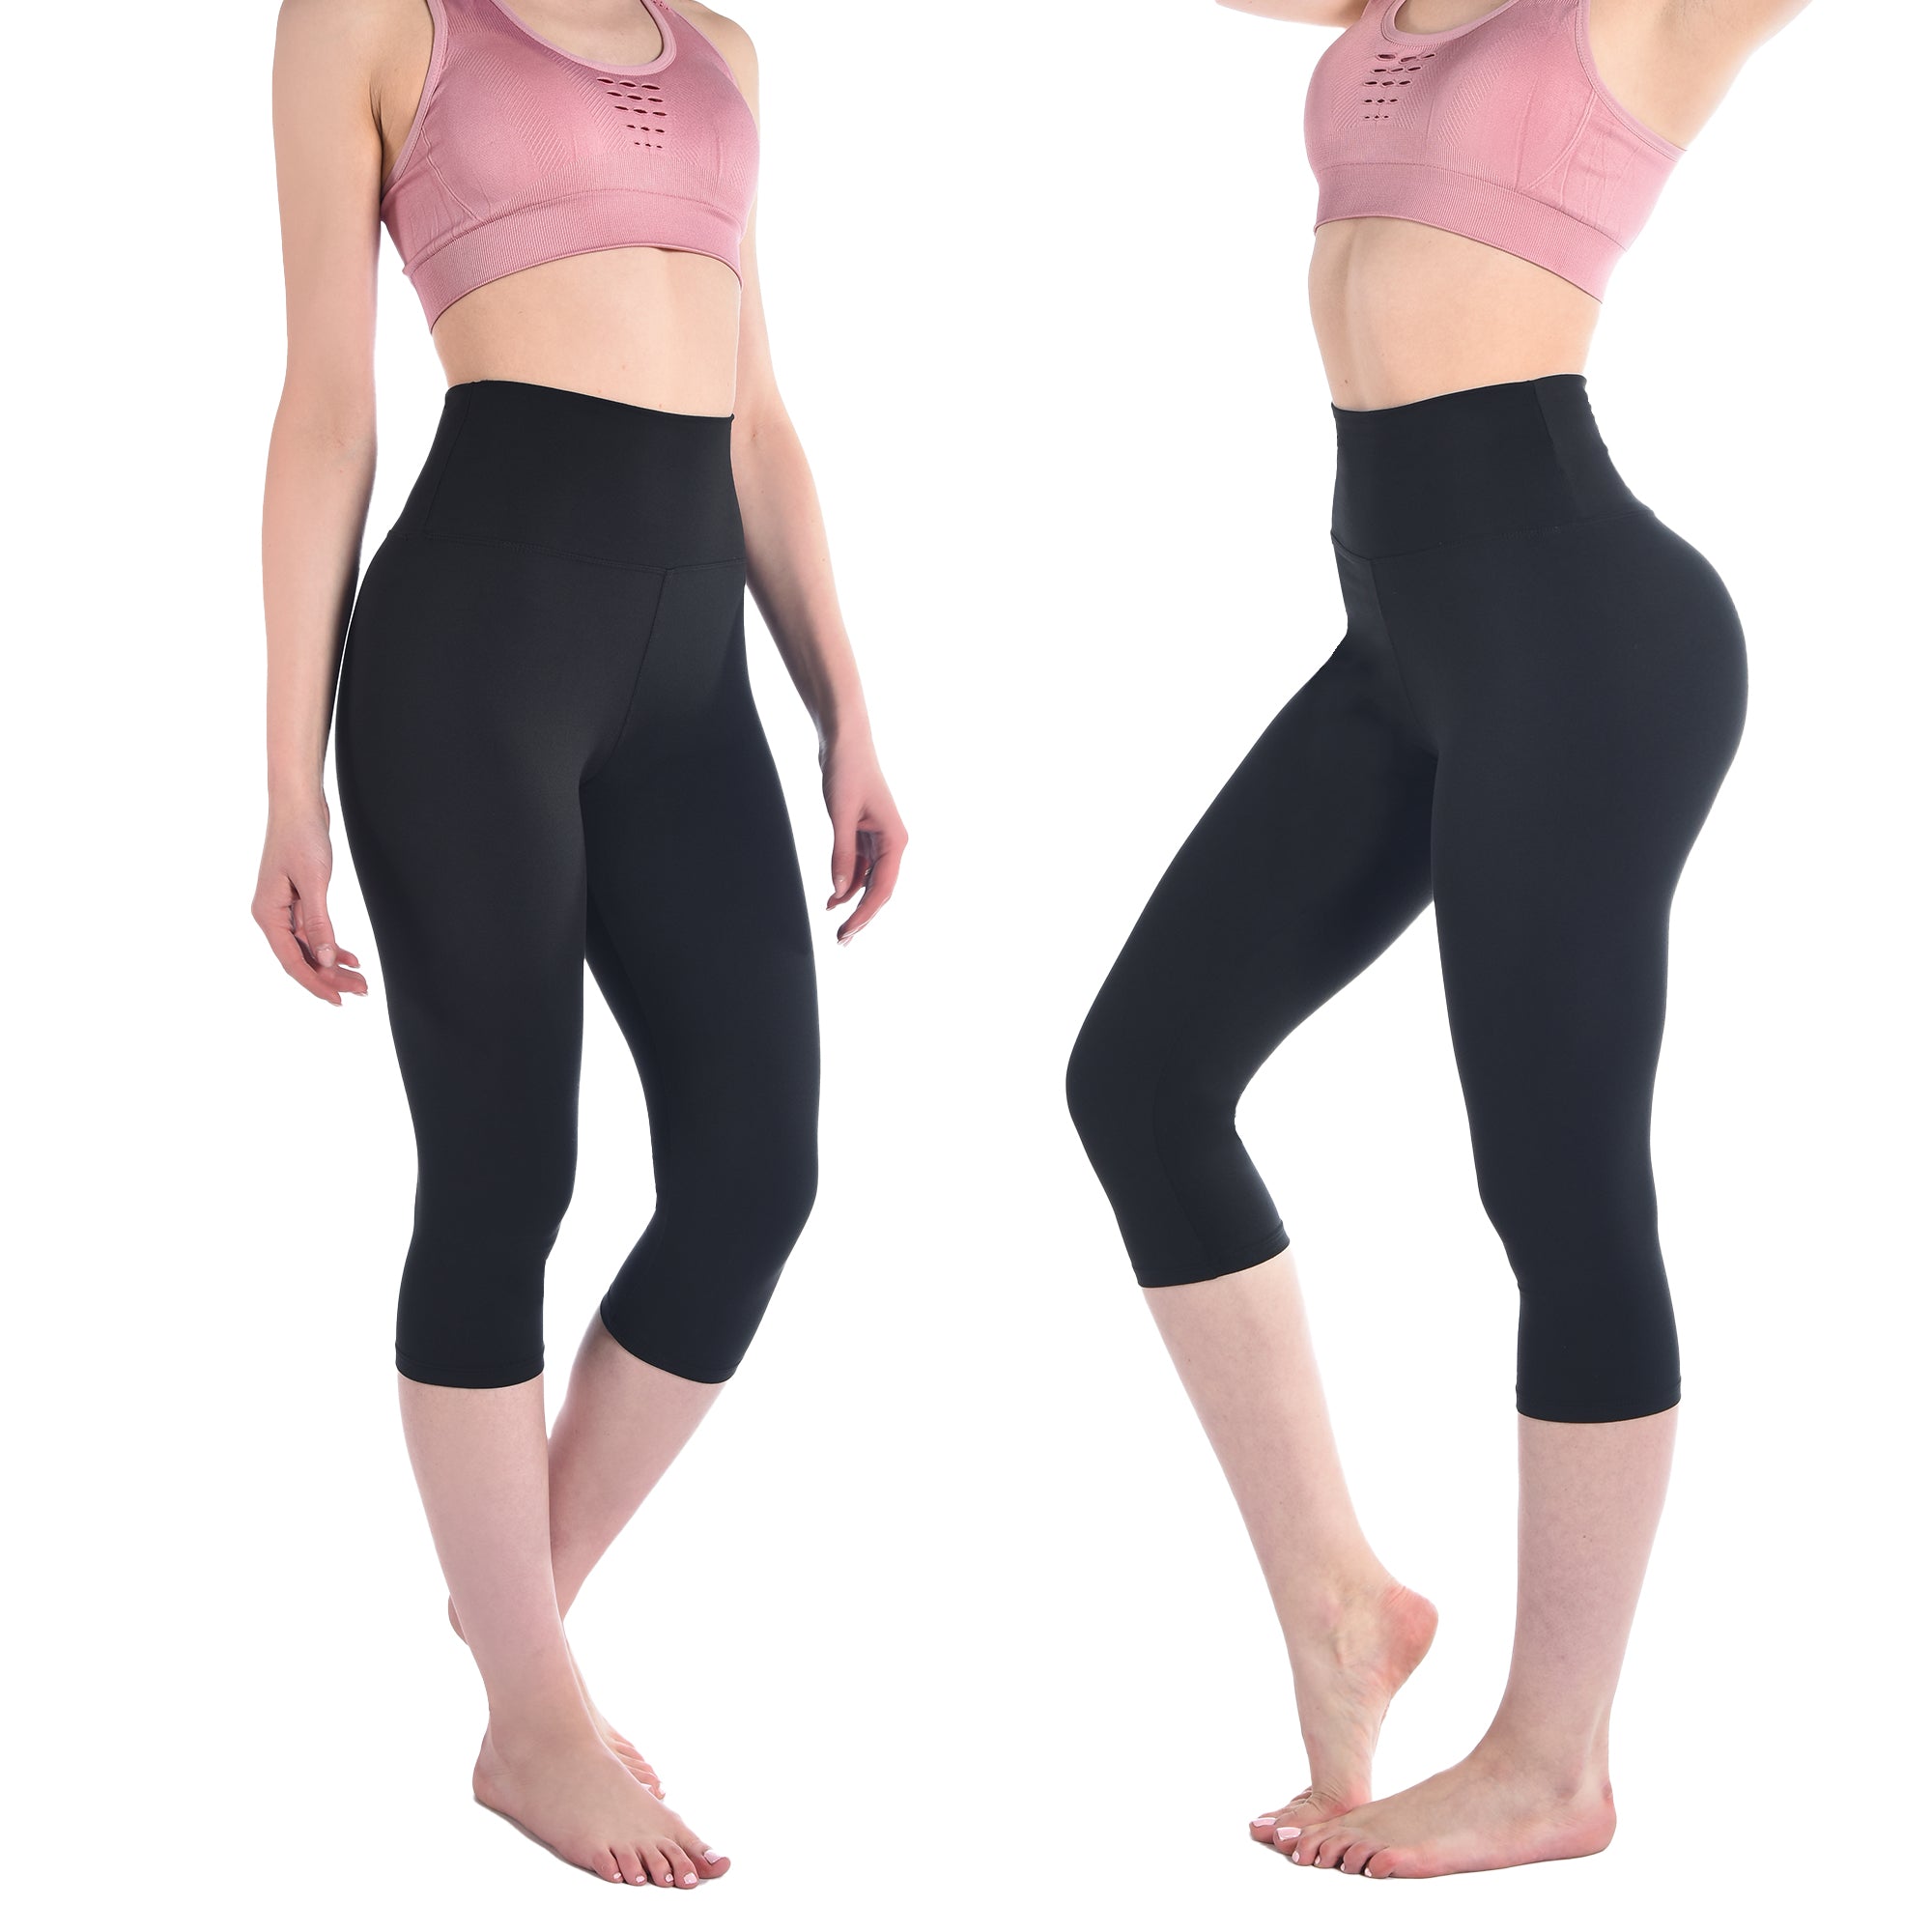 Crop Top Racer - Fitness - Yoga - Sportswear - Crossfit - Gym – BEST WEAR -  See Through Shirts - Sheer Nylon Tops - Second Skin - Transparent Pantyhose  - Tights - Plus Size - Women Men